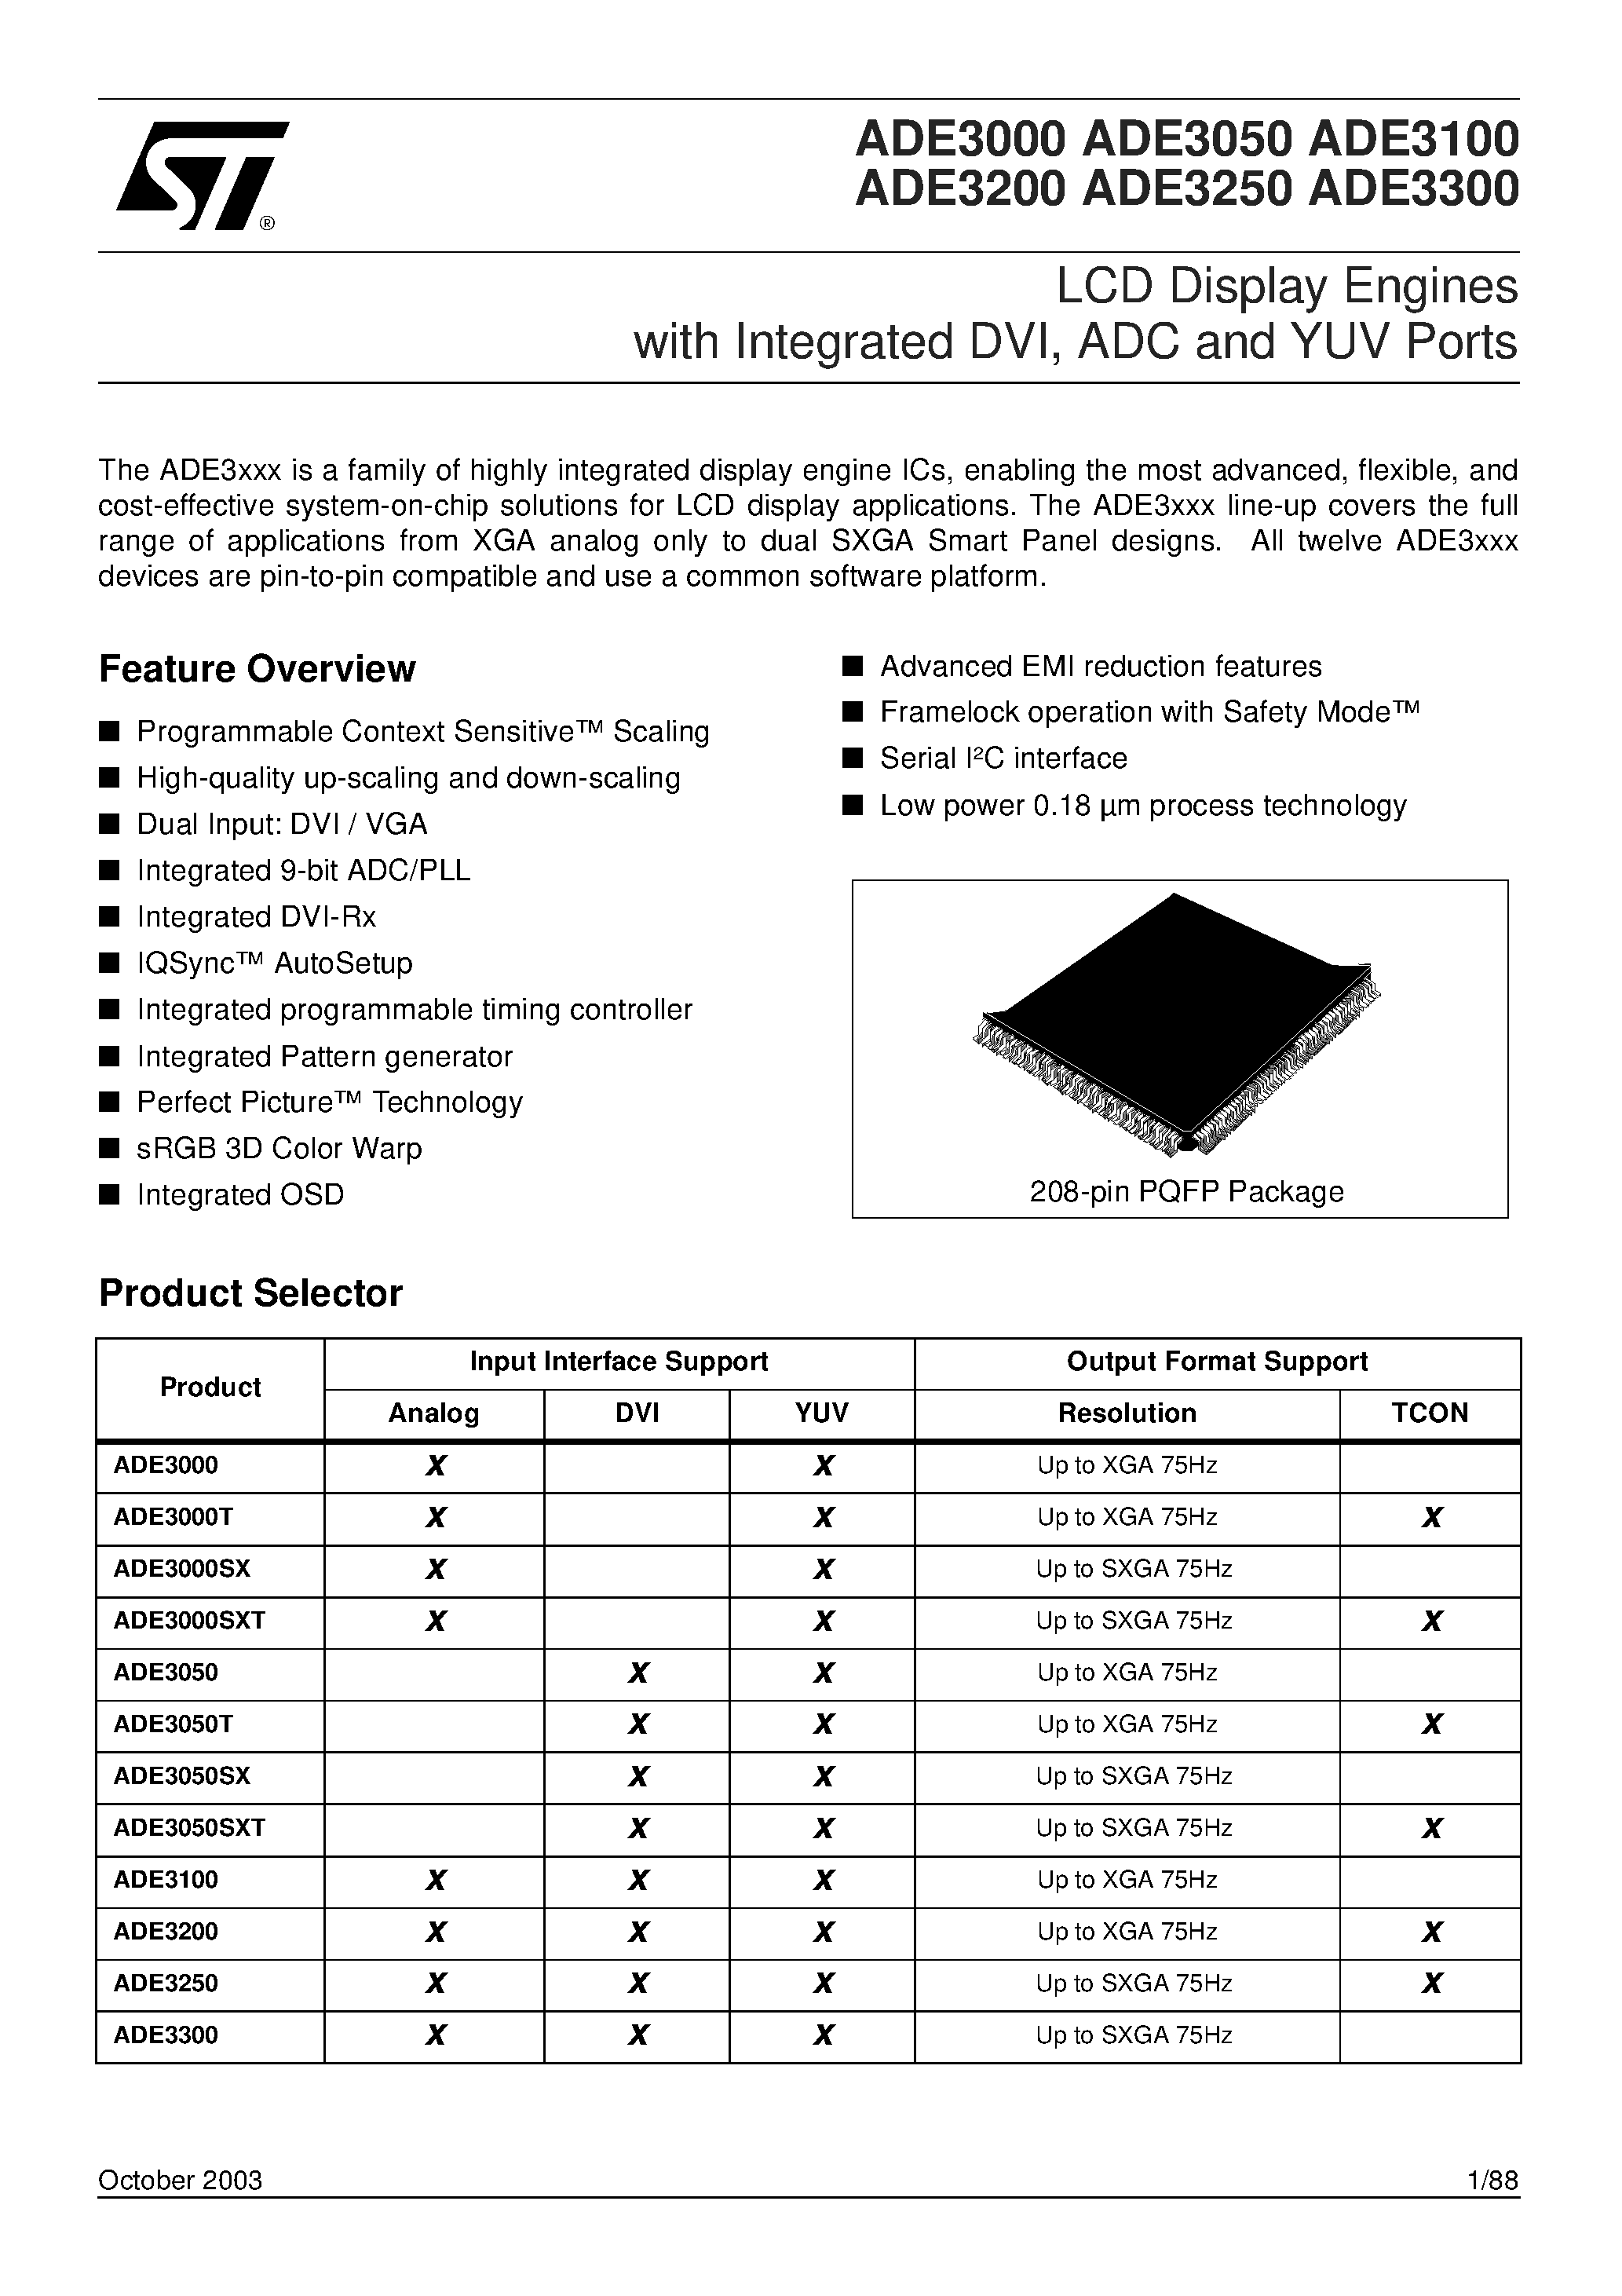 Datasheet ADE3300 - LCD Display Engines with Integrated DVI/ ADC and YUV Ports page 1